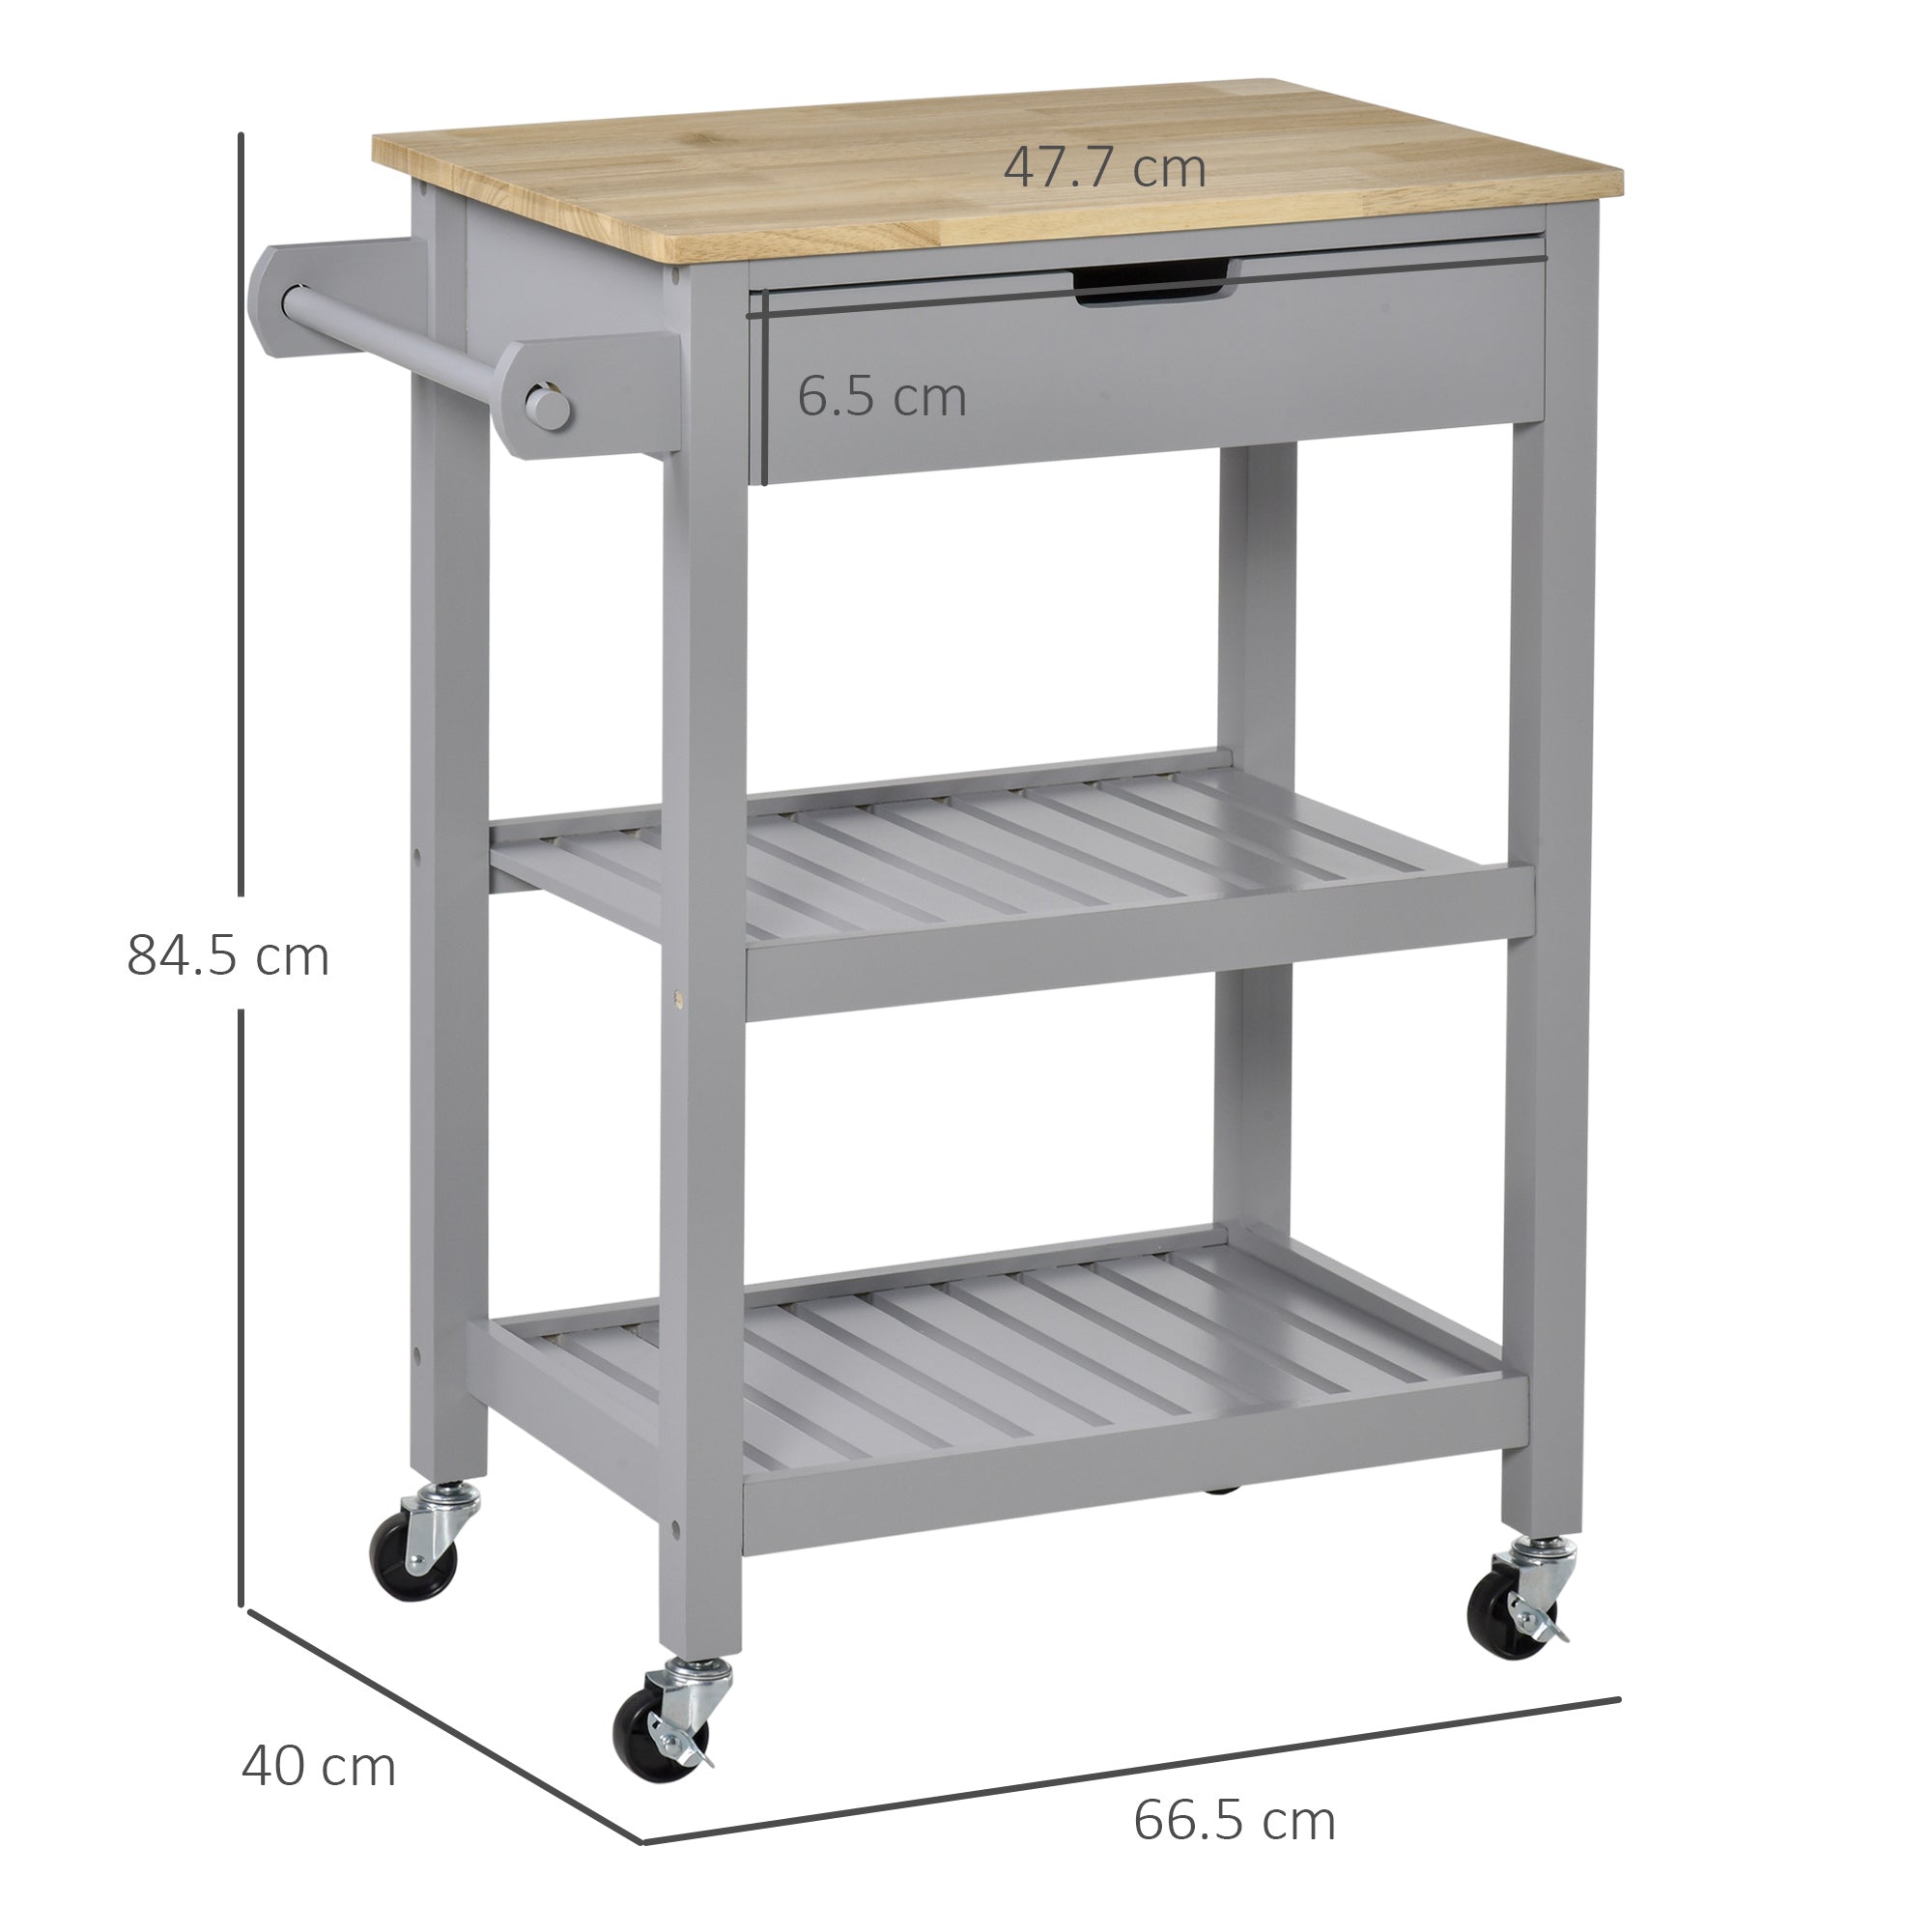 Kitchen Trolley Utility Cart on Wheels with Rubberwood Worktop, Towel Rack, Storage Shelves & Drawer for Dining Room, Grey-2